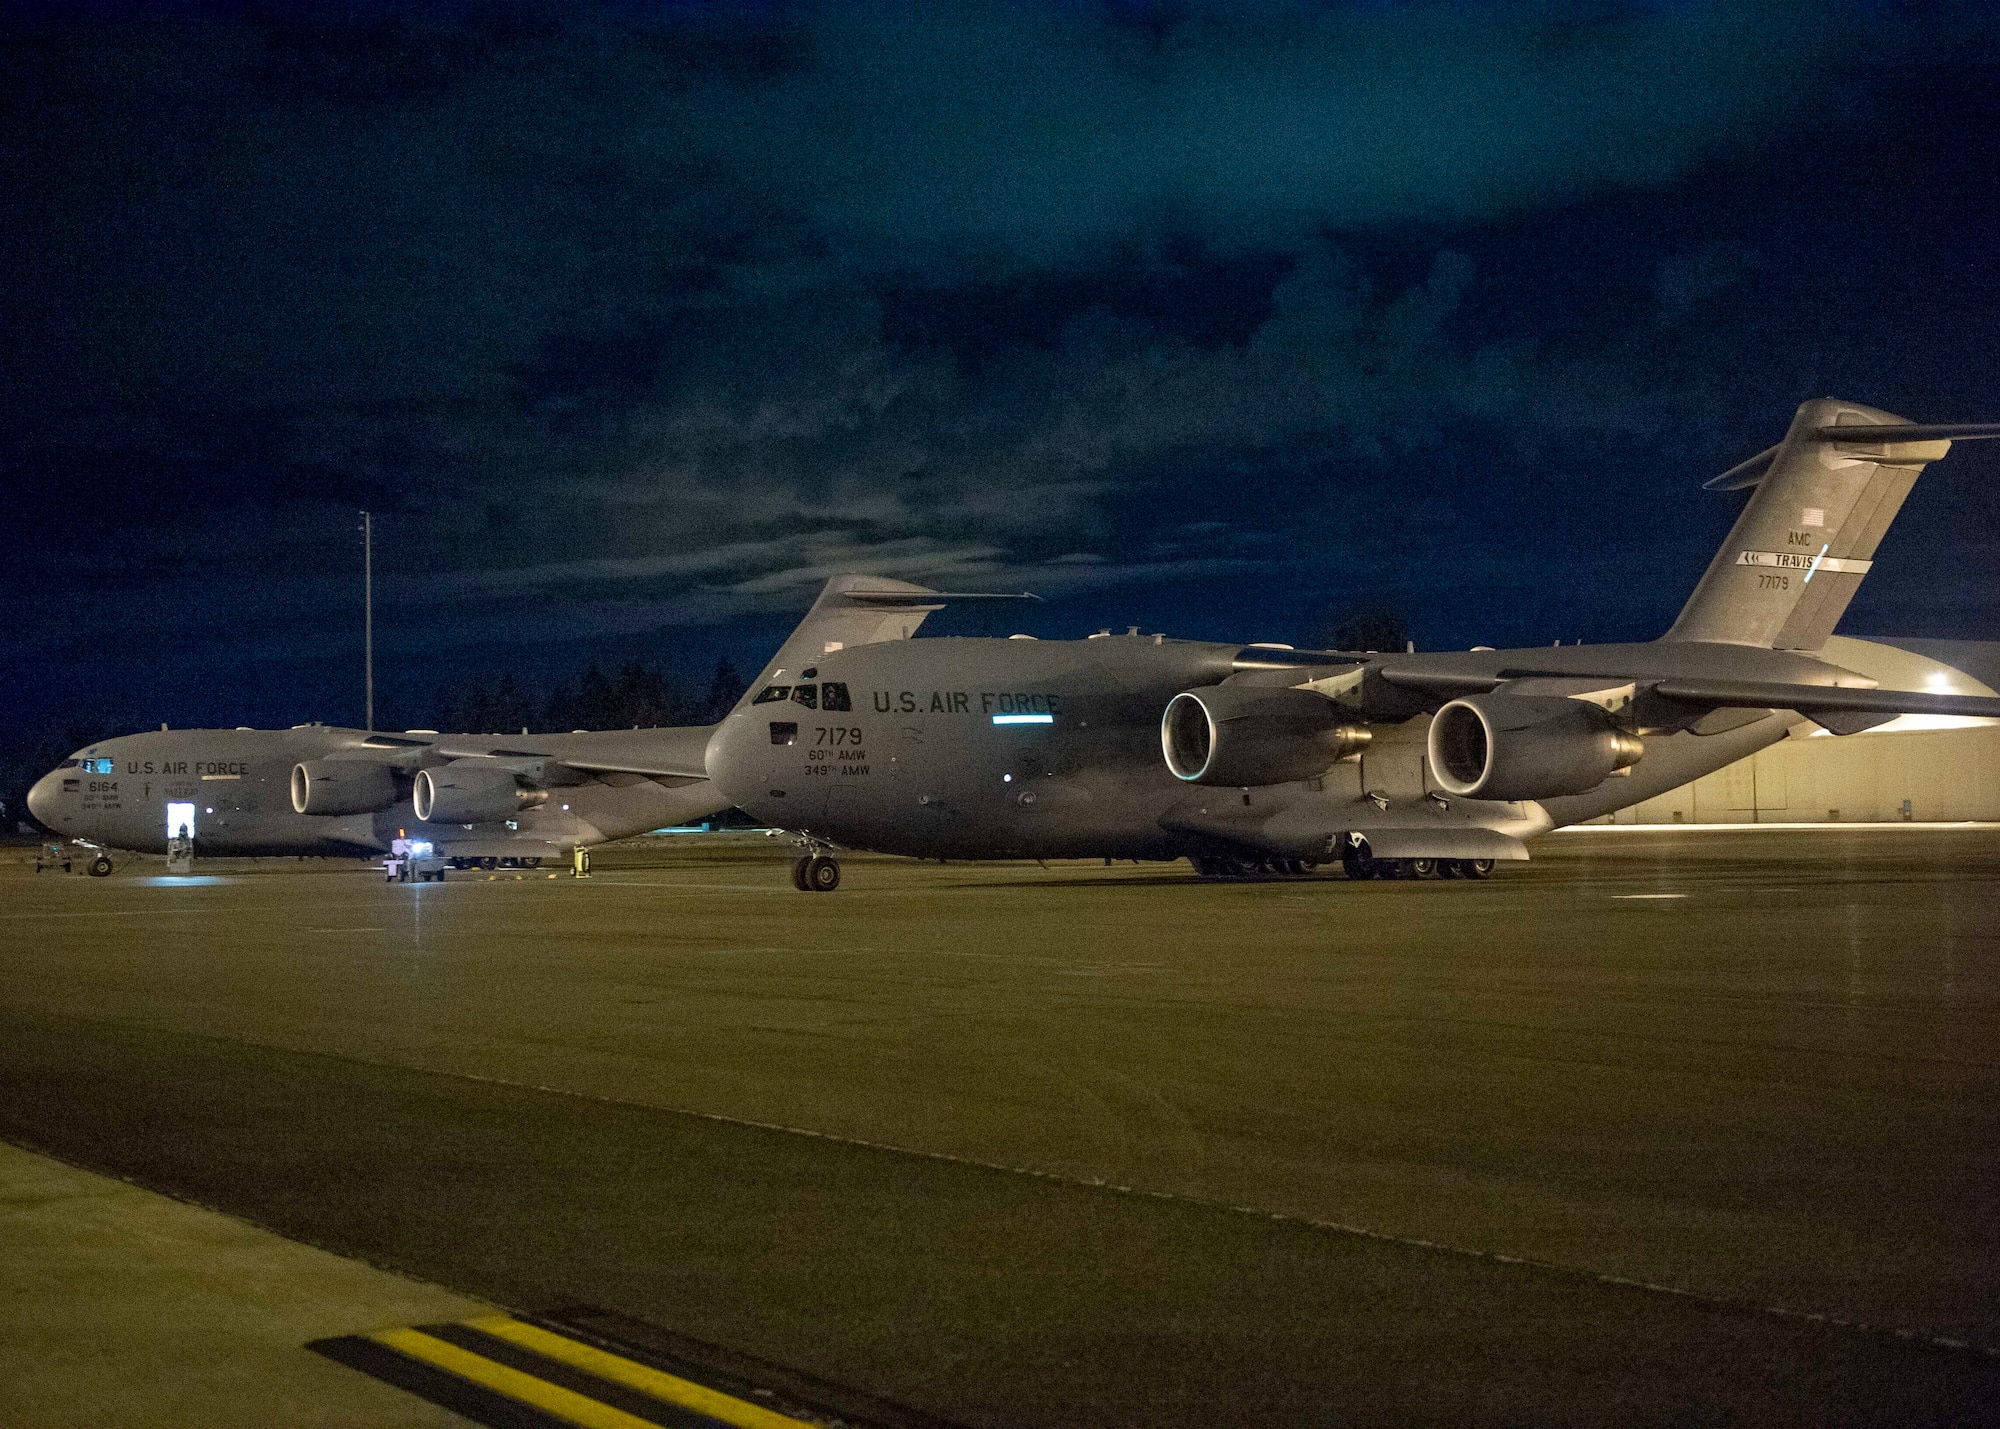 Two C-17 Globemaster III aircraft from Travis Air Force Base, Calif., sit on the flightline at Joint Base Lewis-McChord, Wash., Aug. 20, 2020. Airmen from Team McChord coordinated arrival and transportation for air crews of four Travis AFB C-17s after they evacuated due to fires near Fairfield and Vacaville, Calif. (U.S. Air Force photo by Senior Airman Sara Hoerichs)